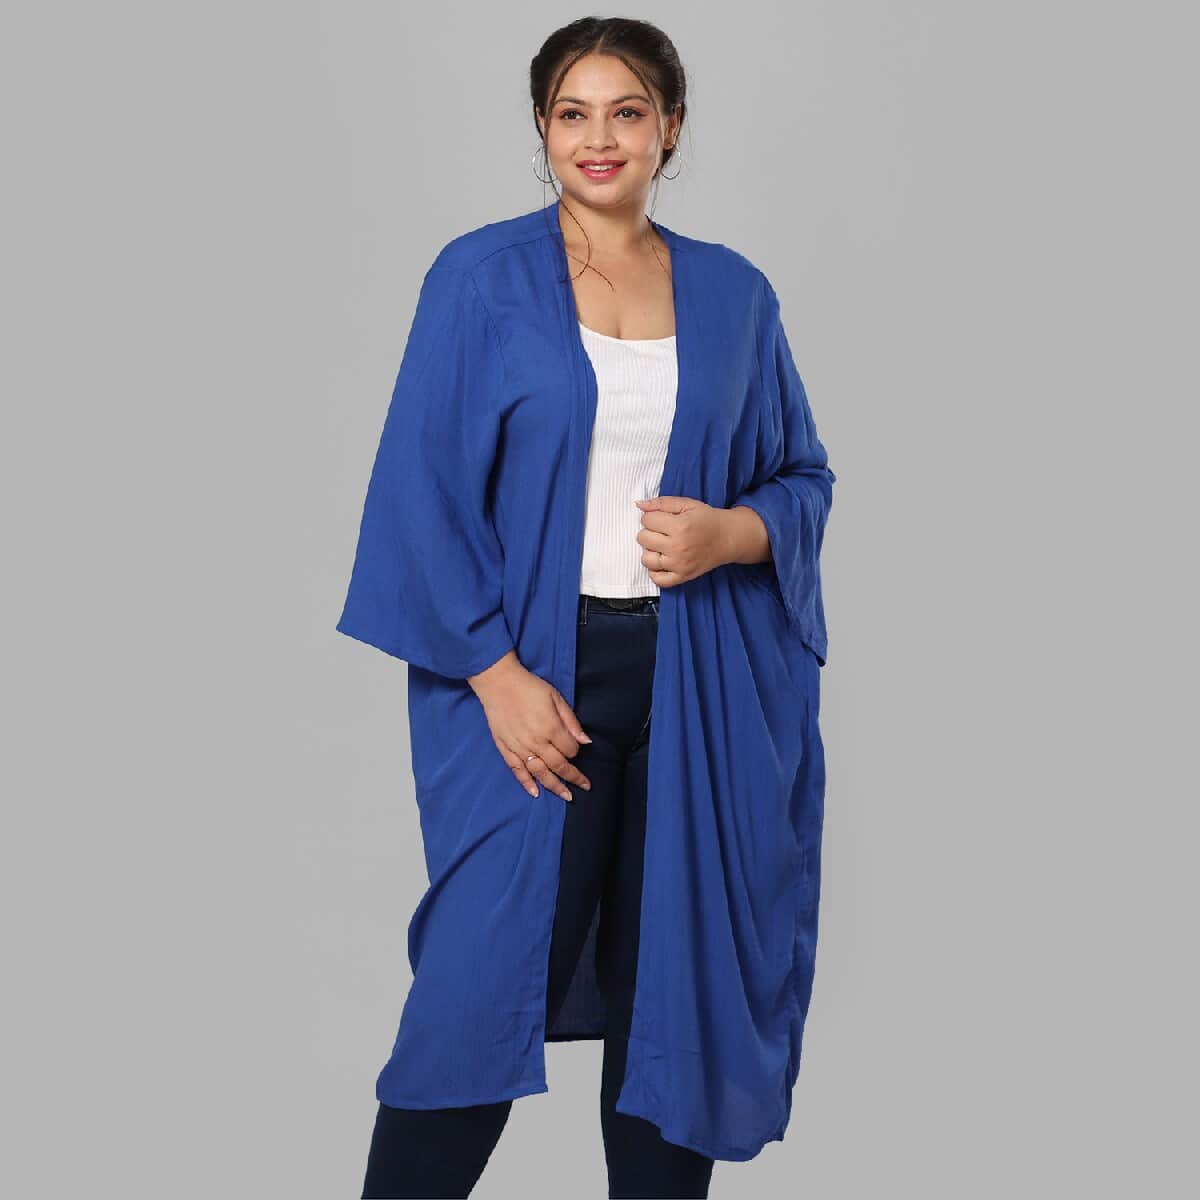 Blue Tie Dye Kimono Duster with Bell Sleeves - One Size Fits Most image number 0